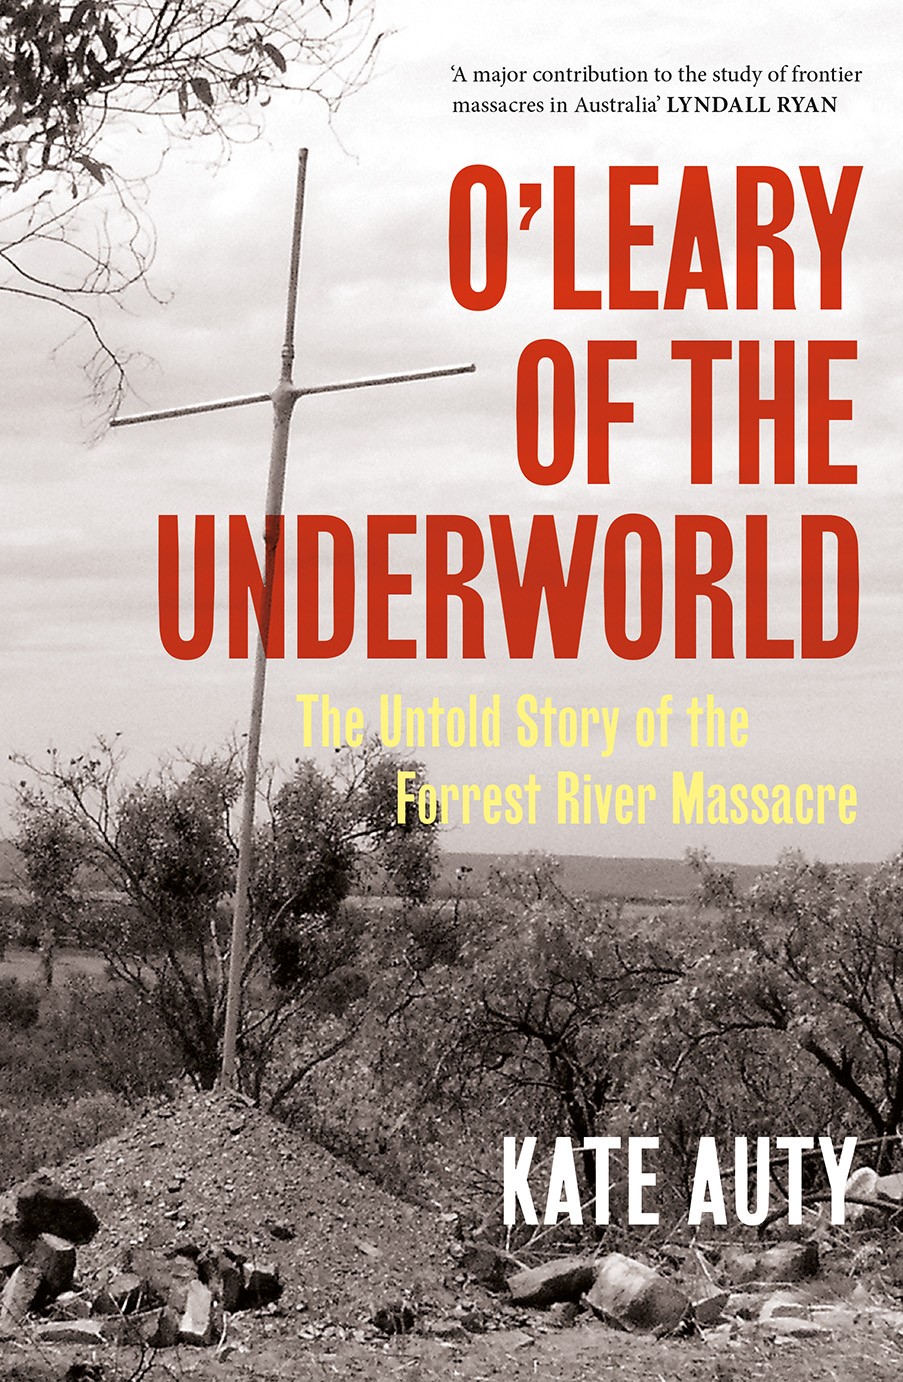 O'Leary of the Underworld: The untold story of the Forrest River Massacre